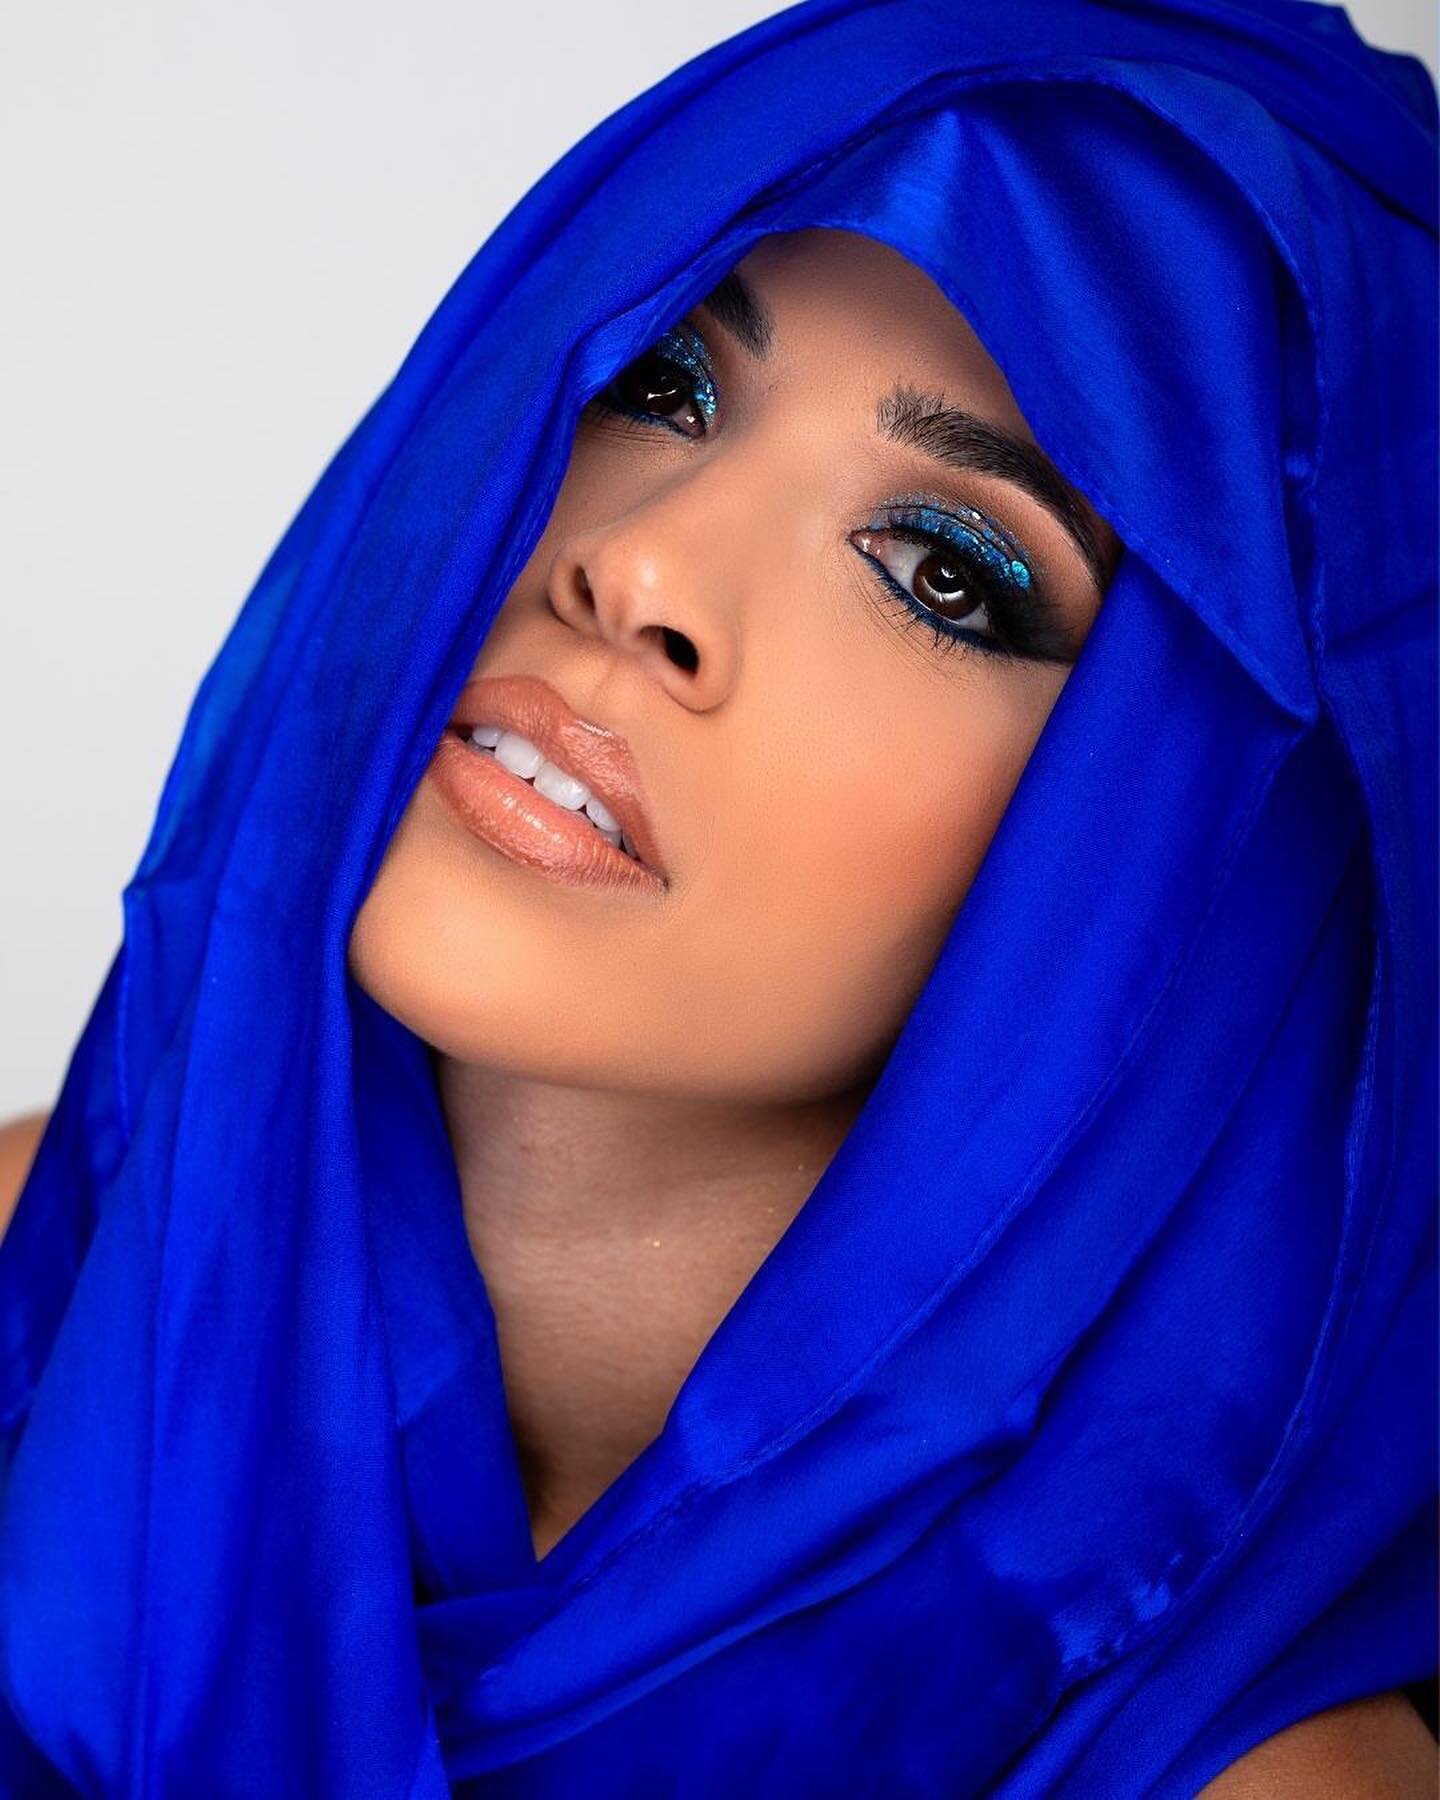 Color Series Part 3 with @bossbeautymakeupacademy 🌈🎨

Part 3: @bossbeautymakeupacademy MUA instructor @darleneglams picked BLUE for her model @_sydneejohnson_ 

For the prop we picked a silk scarf. I wanted the scarf to help enhance the beautiful b